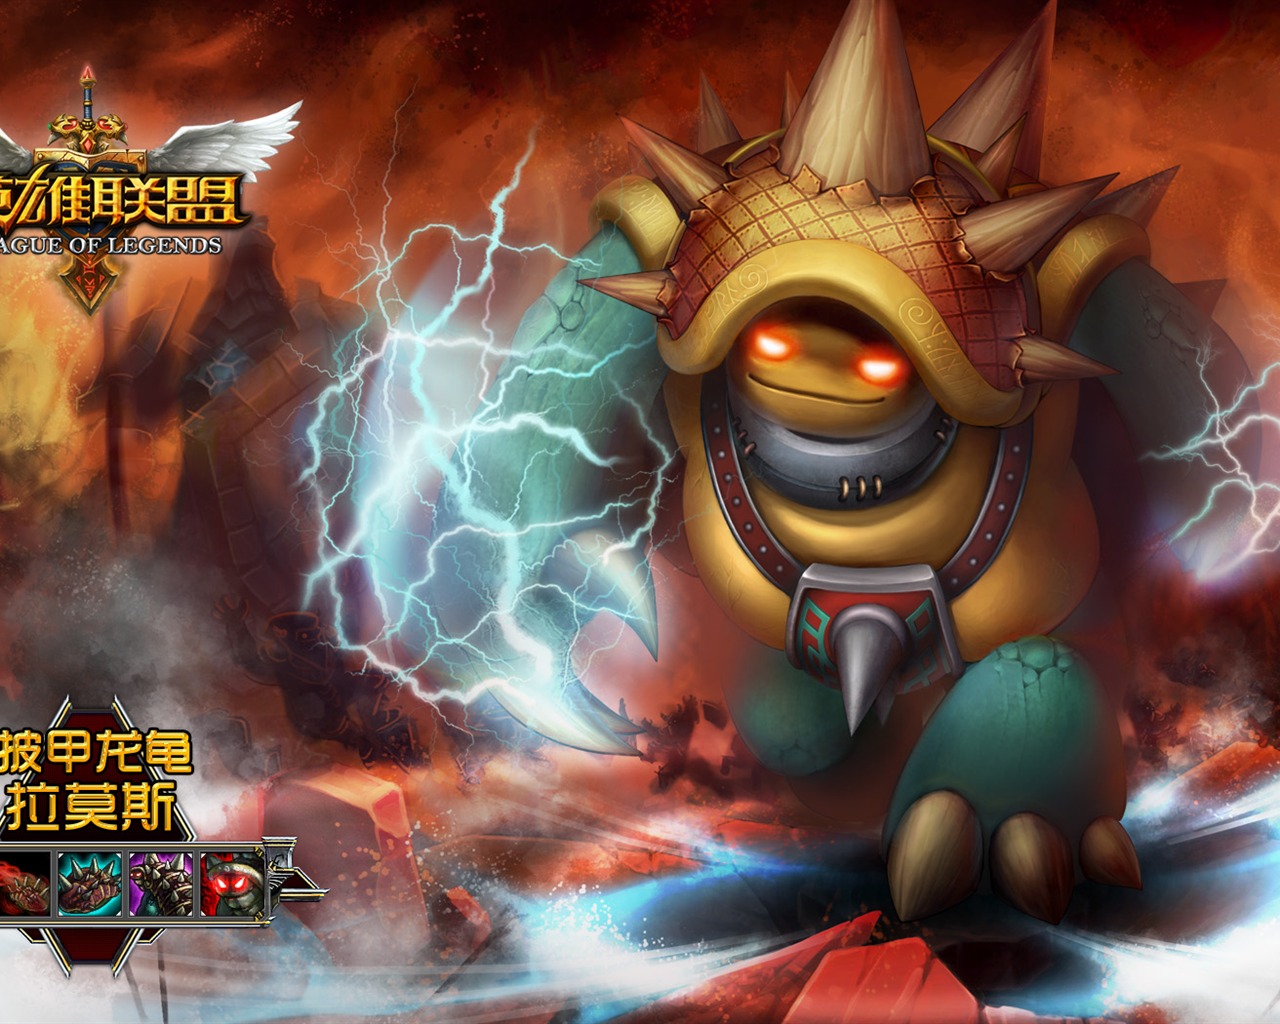 League of Legends Thema Tapete #10 - 1280x1024